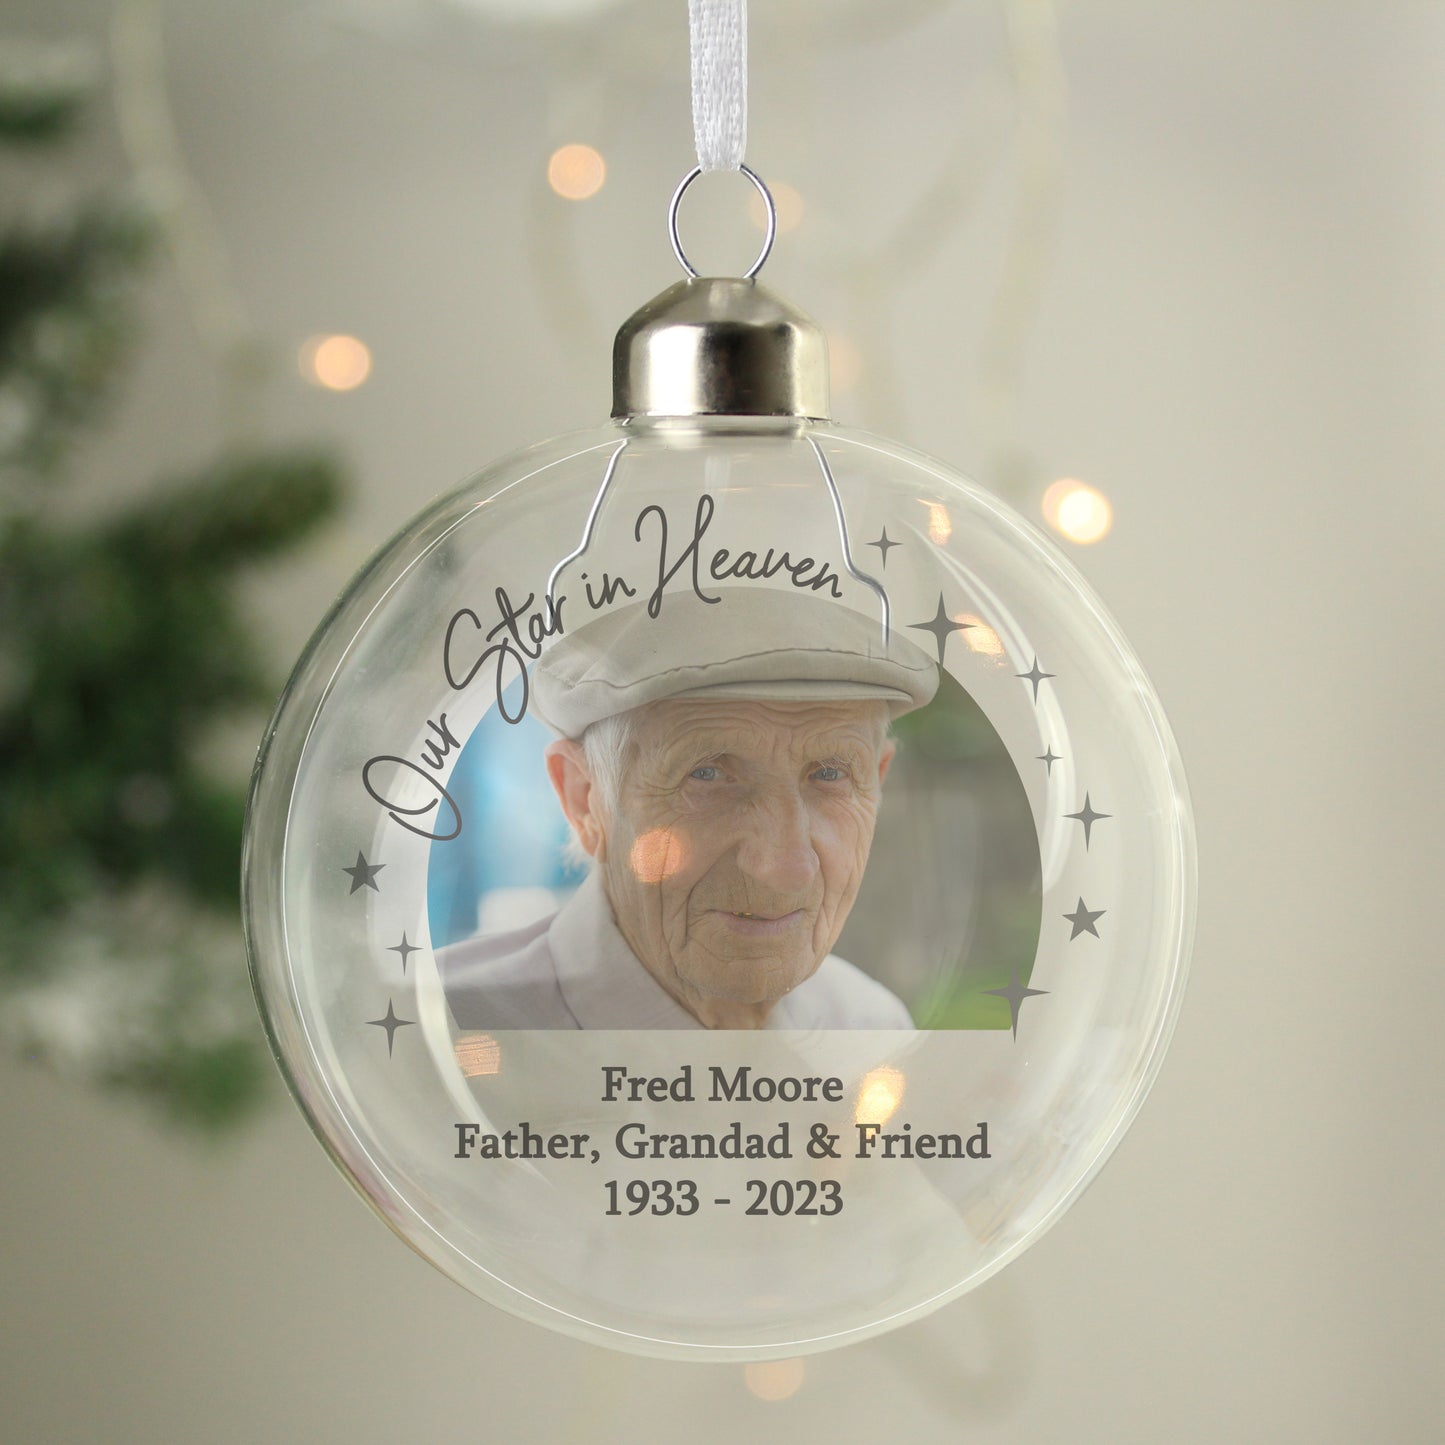 Personalised “Our Star In Heaven” Glass Christmas Bauble